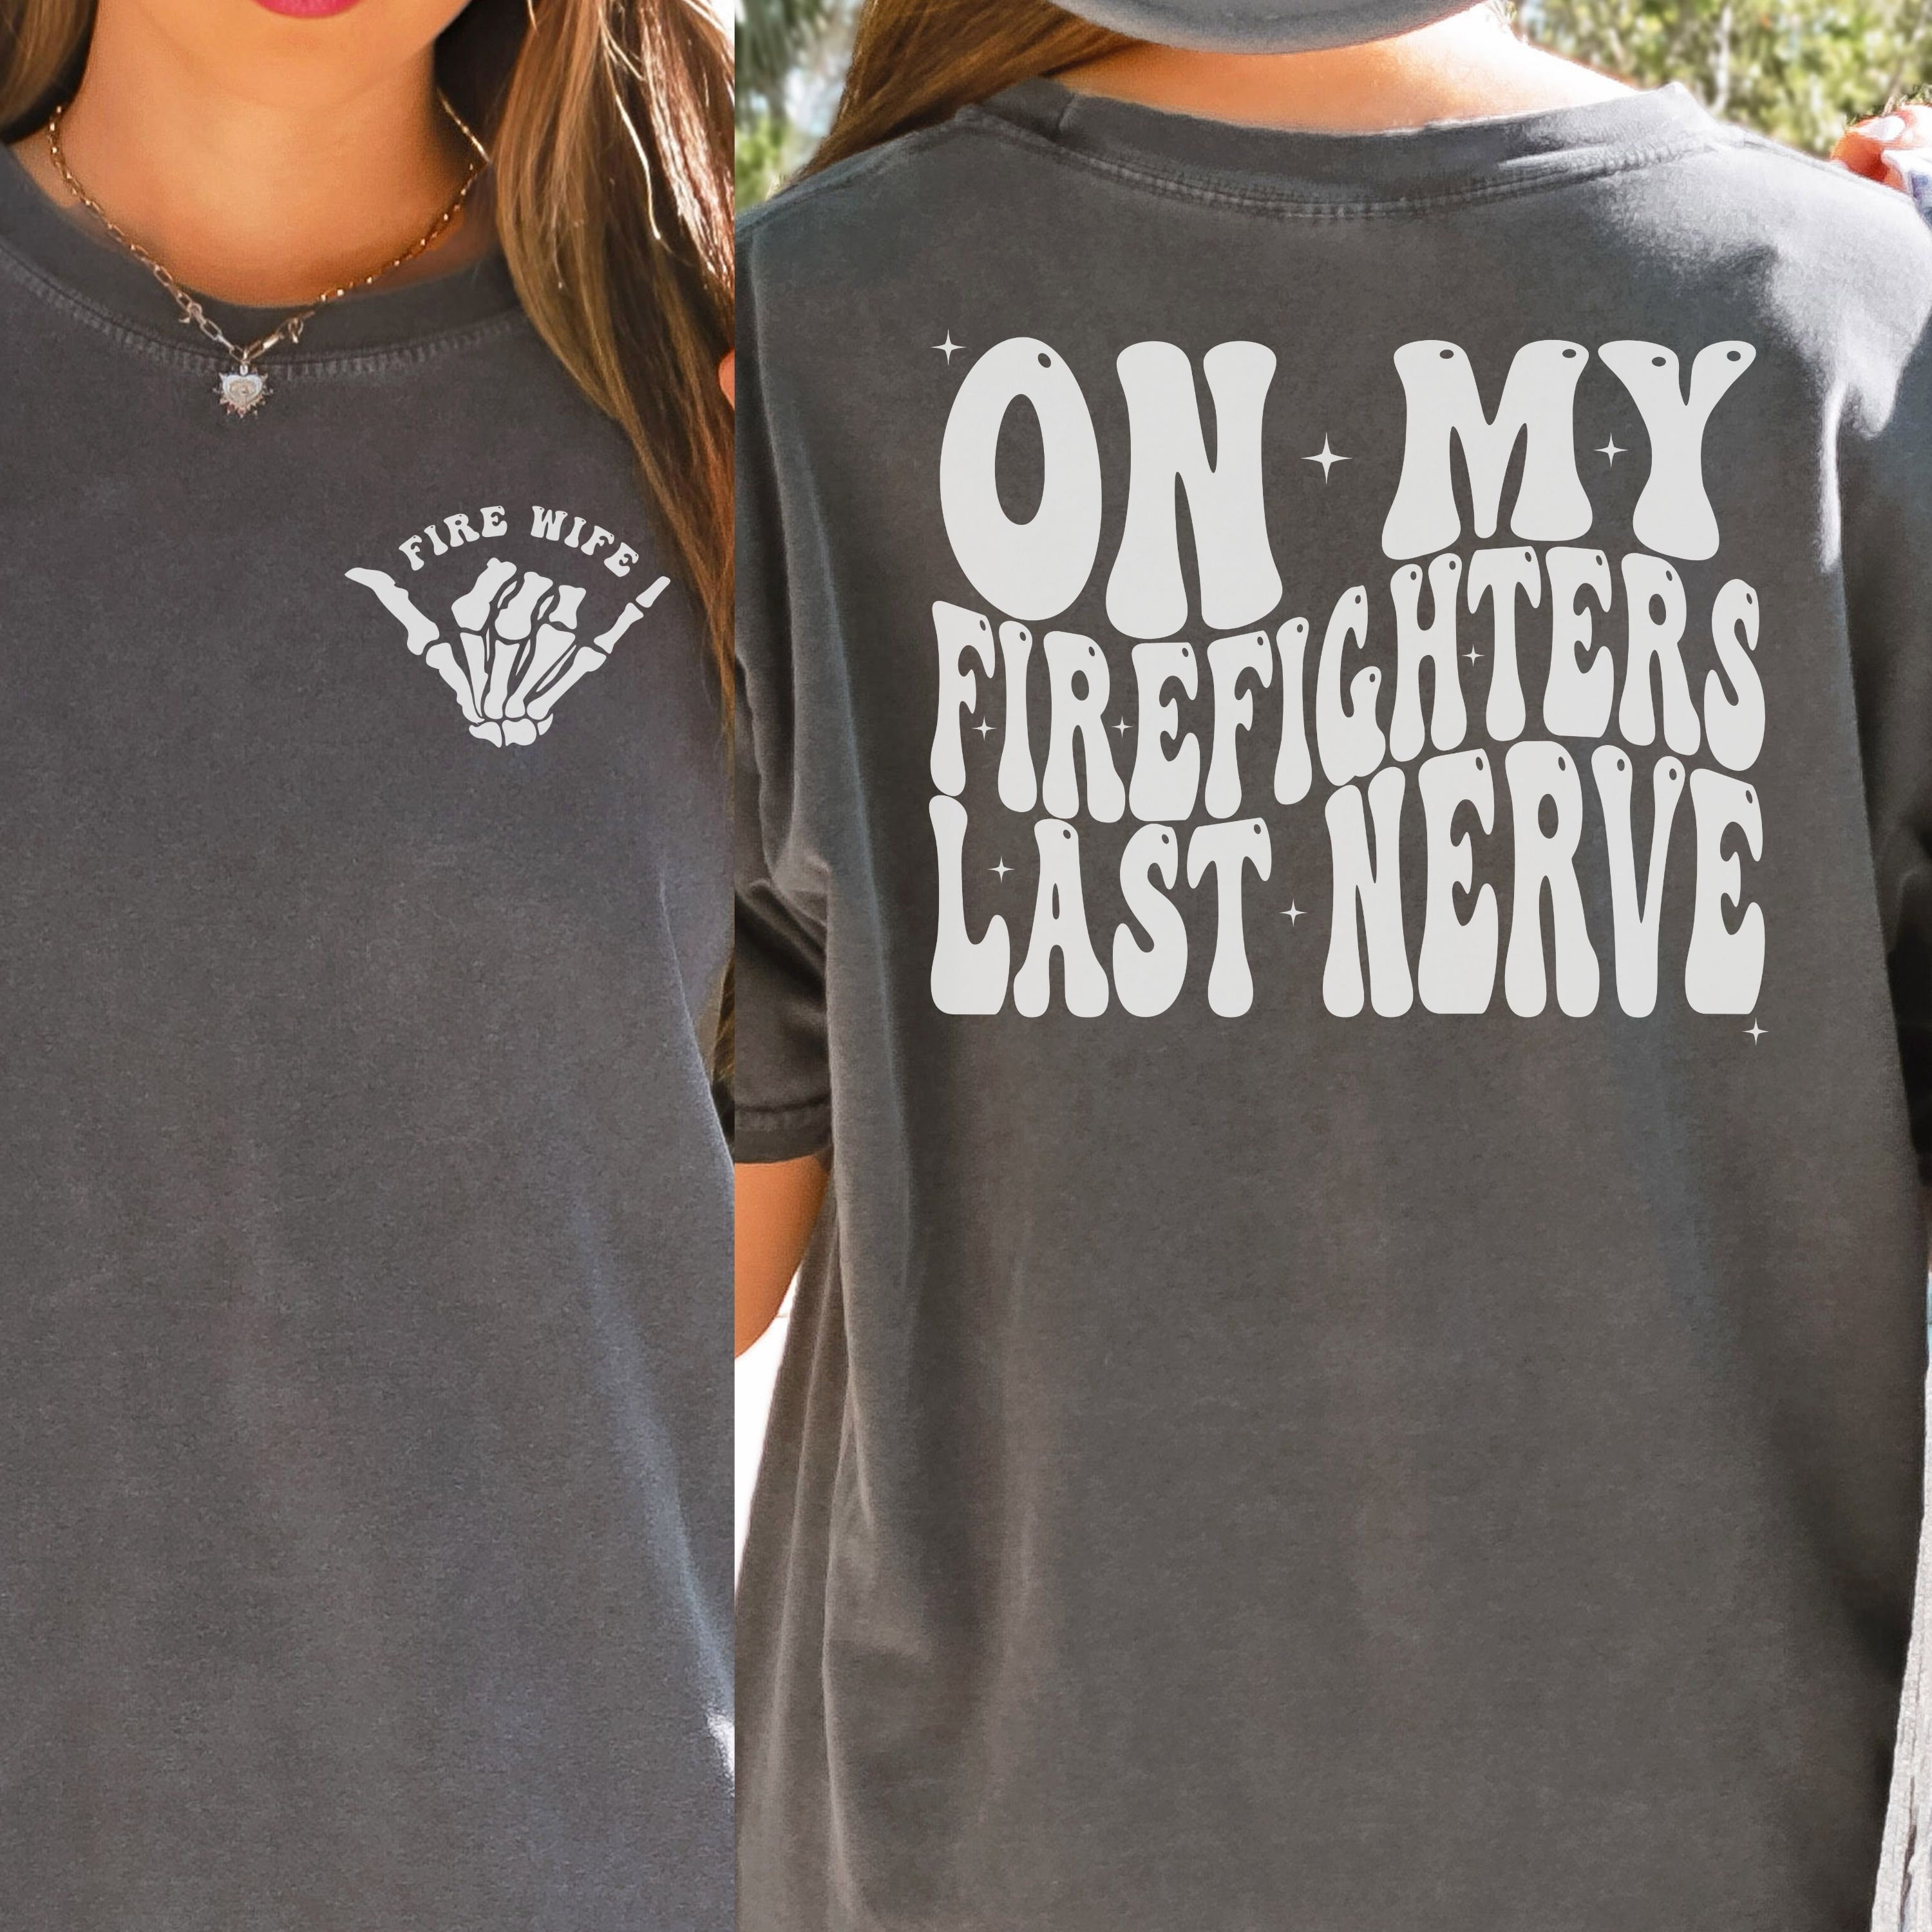 Firefighter Wife Shirt on My Firefighters Last Nerve Comfort